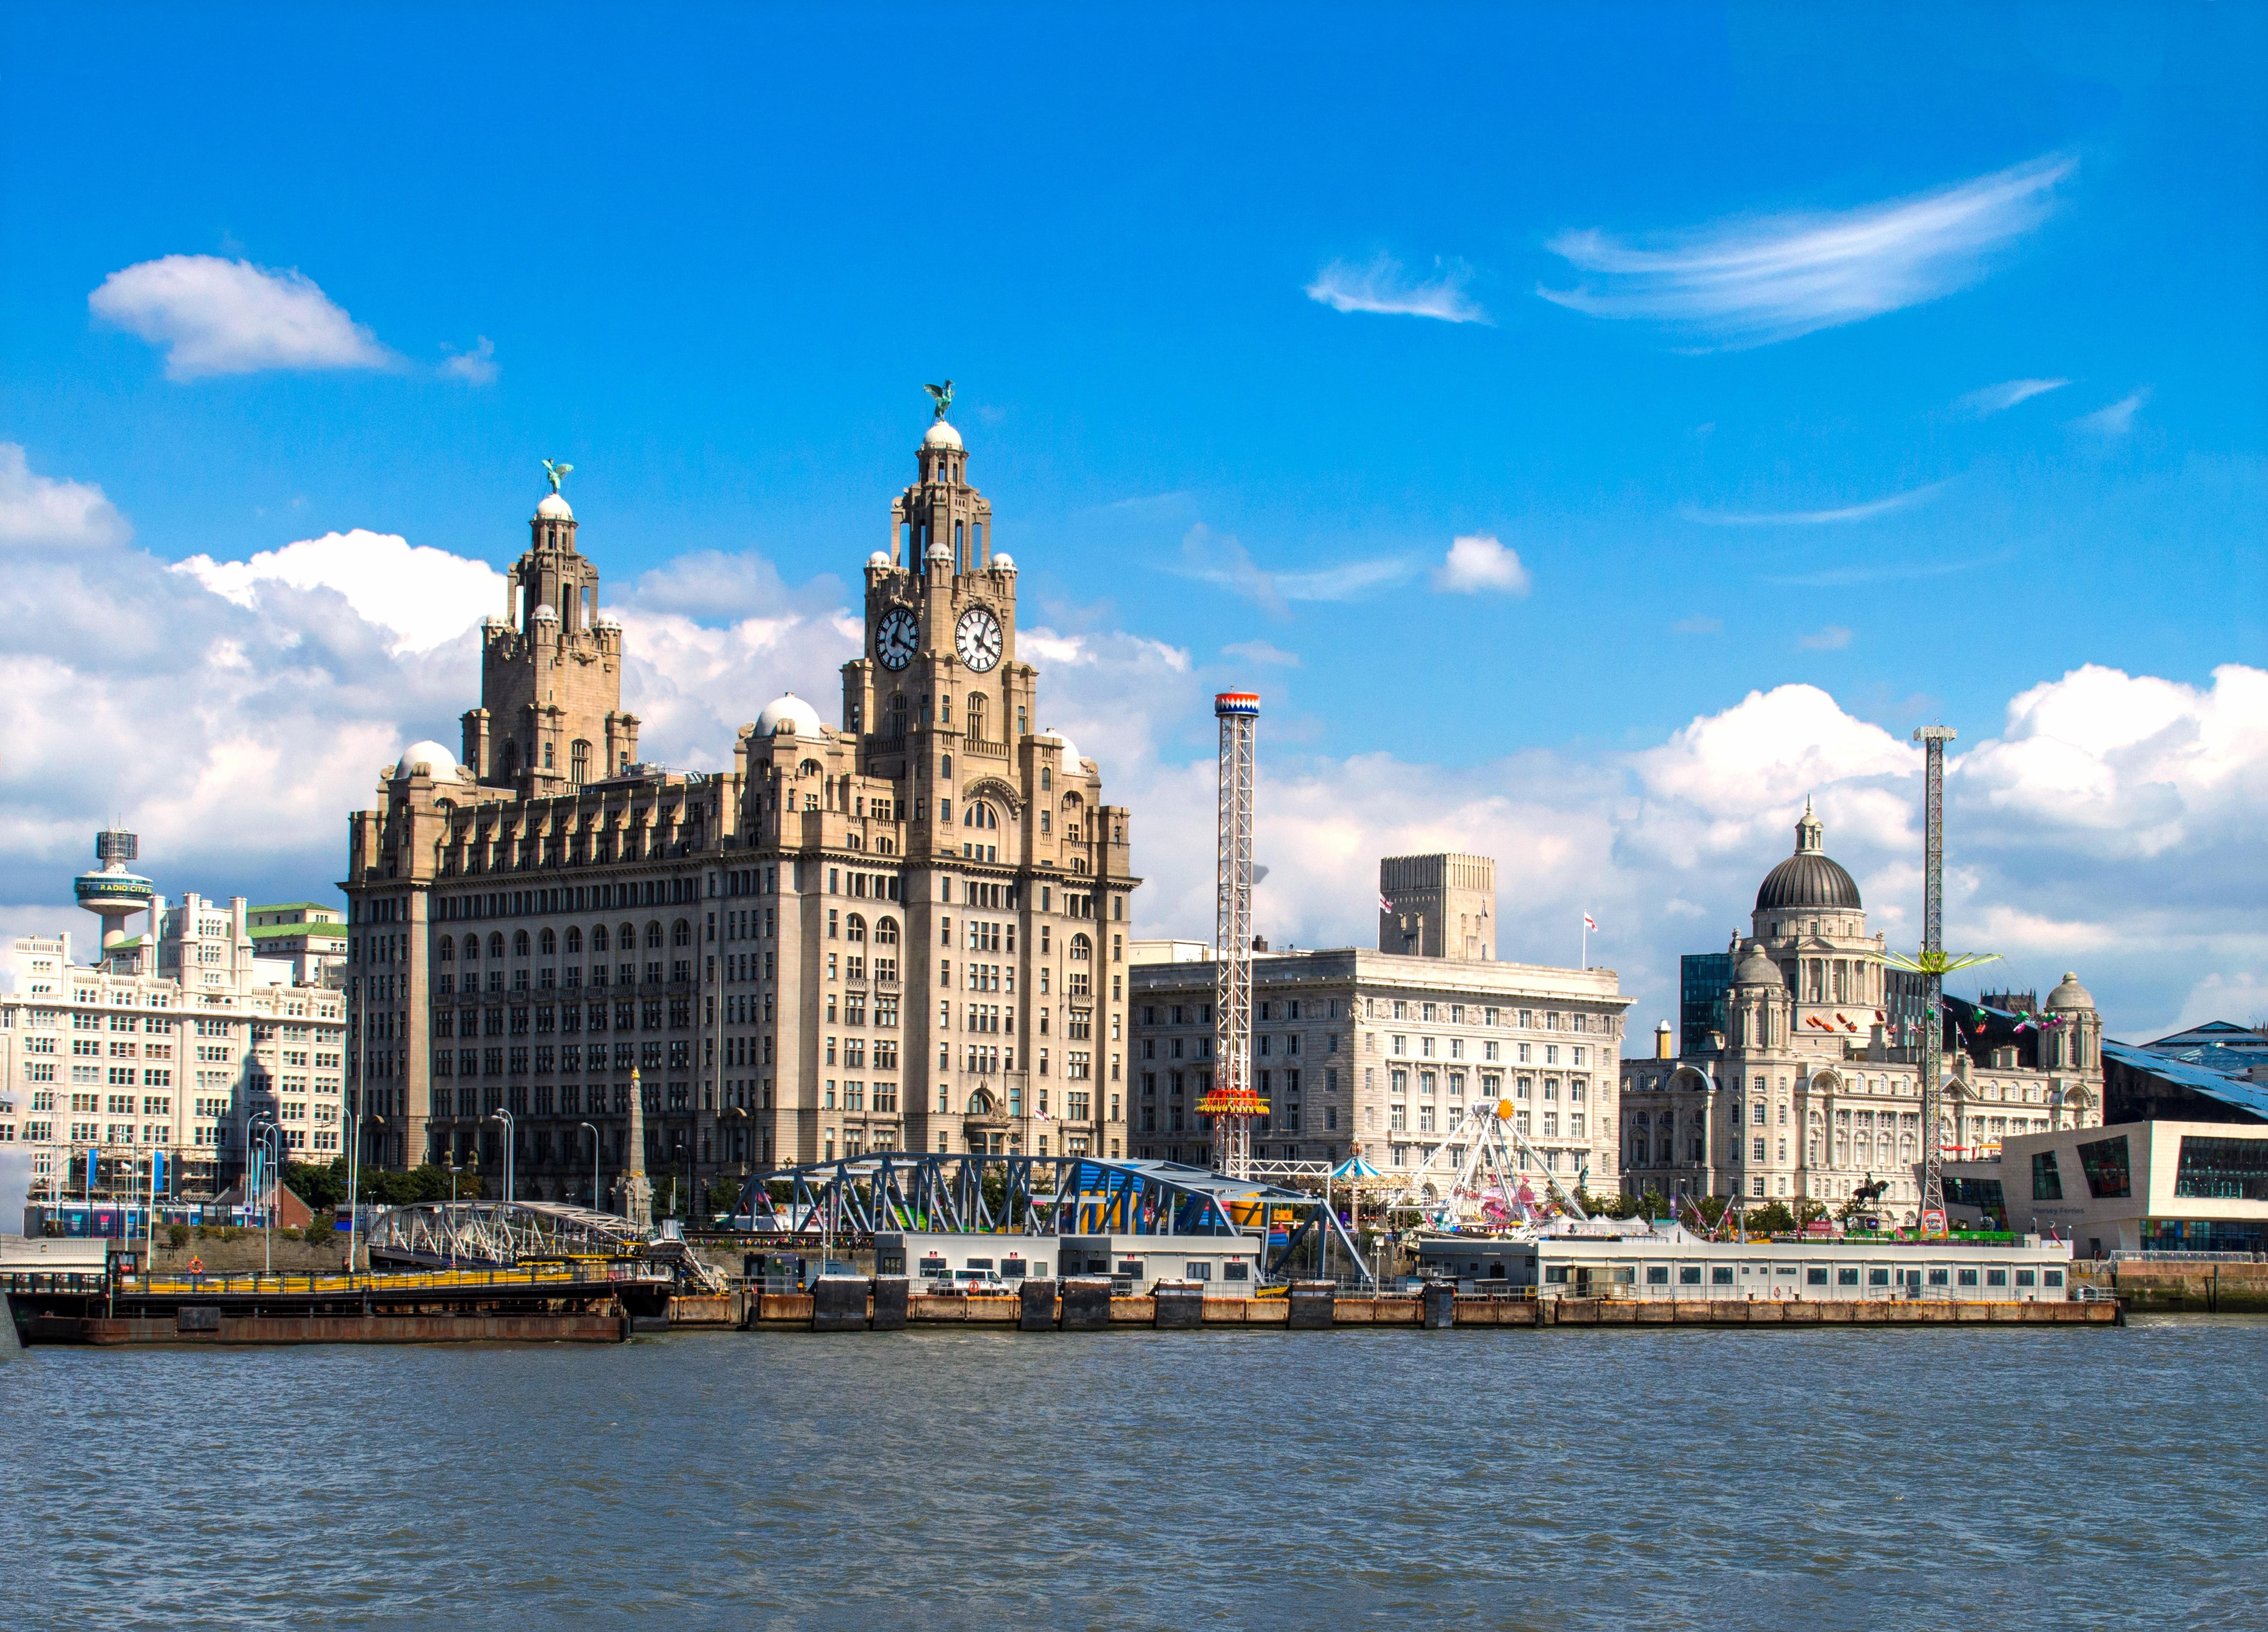 Lively Liverpool has plenty of attractions to keep you busy on your city break from Belfast